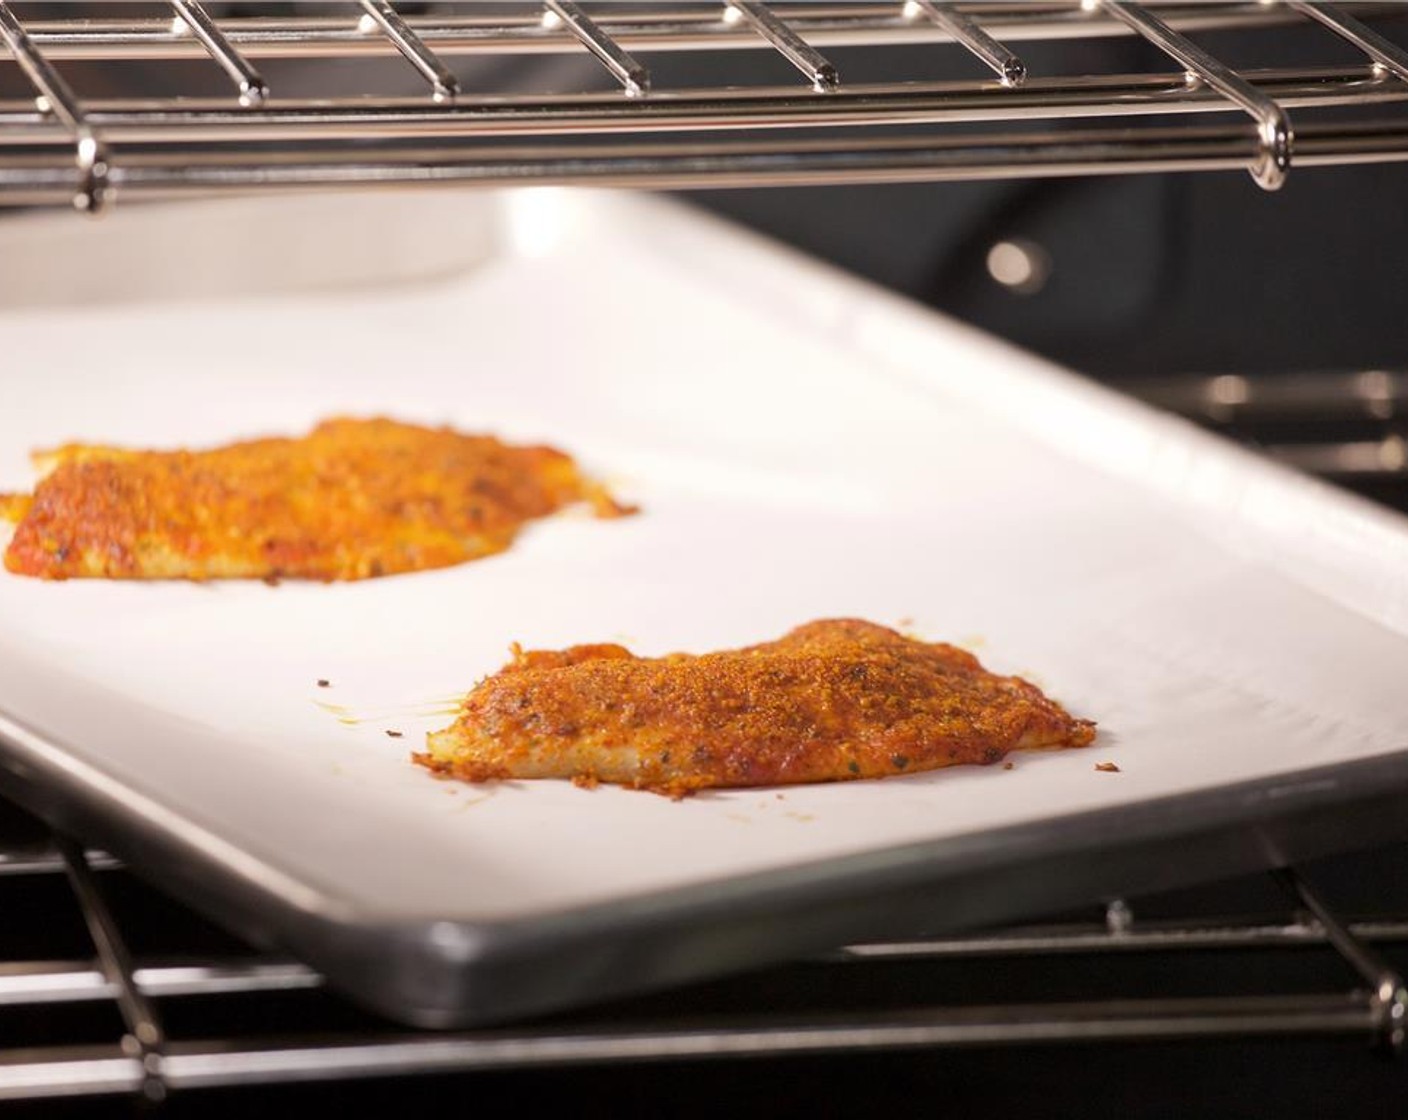 step 8 Place the fillets on a sheet pan lined with parchment paper and bake in the oven for 11 minutes until the fish flakes easily with a fork.